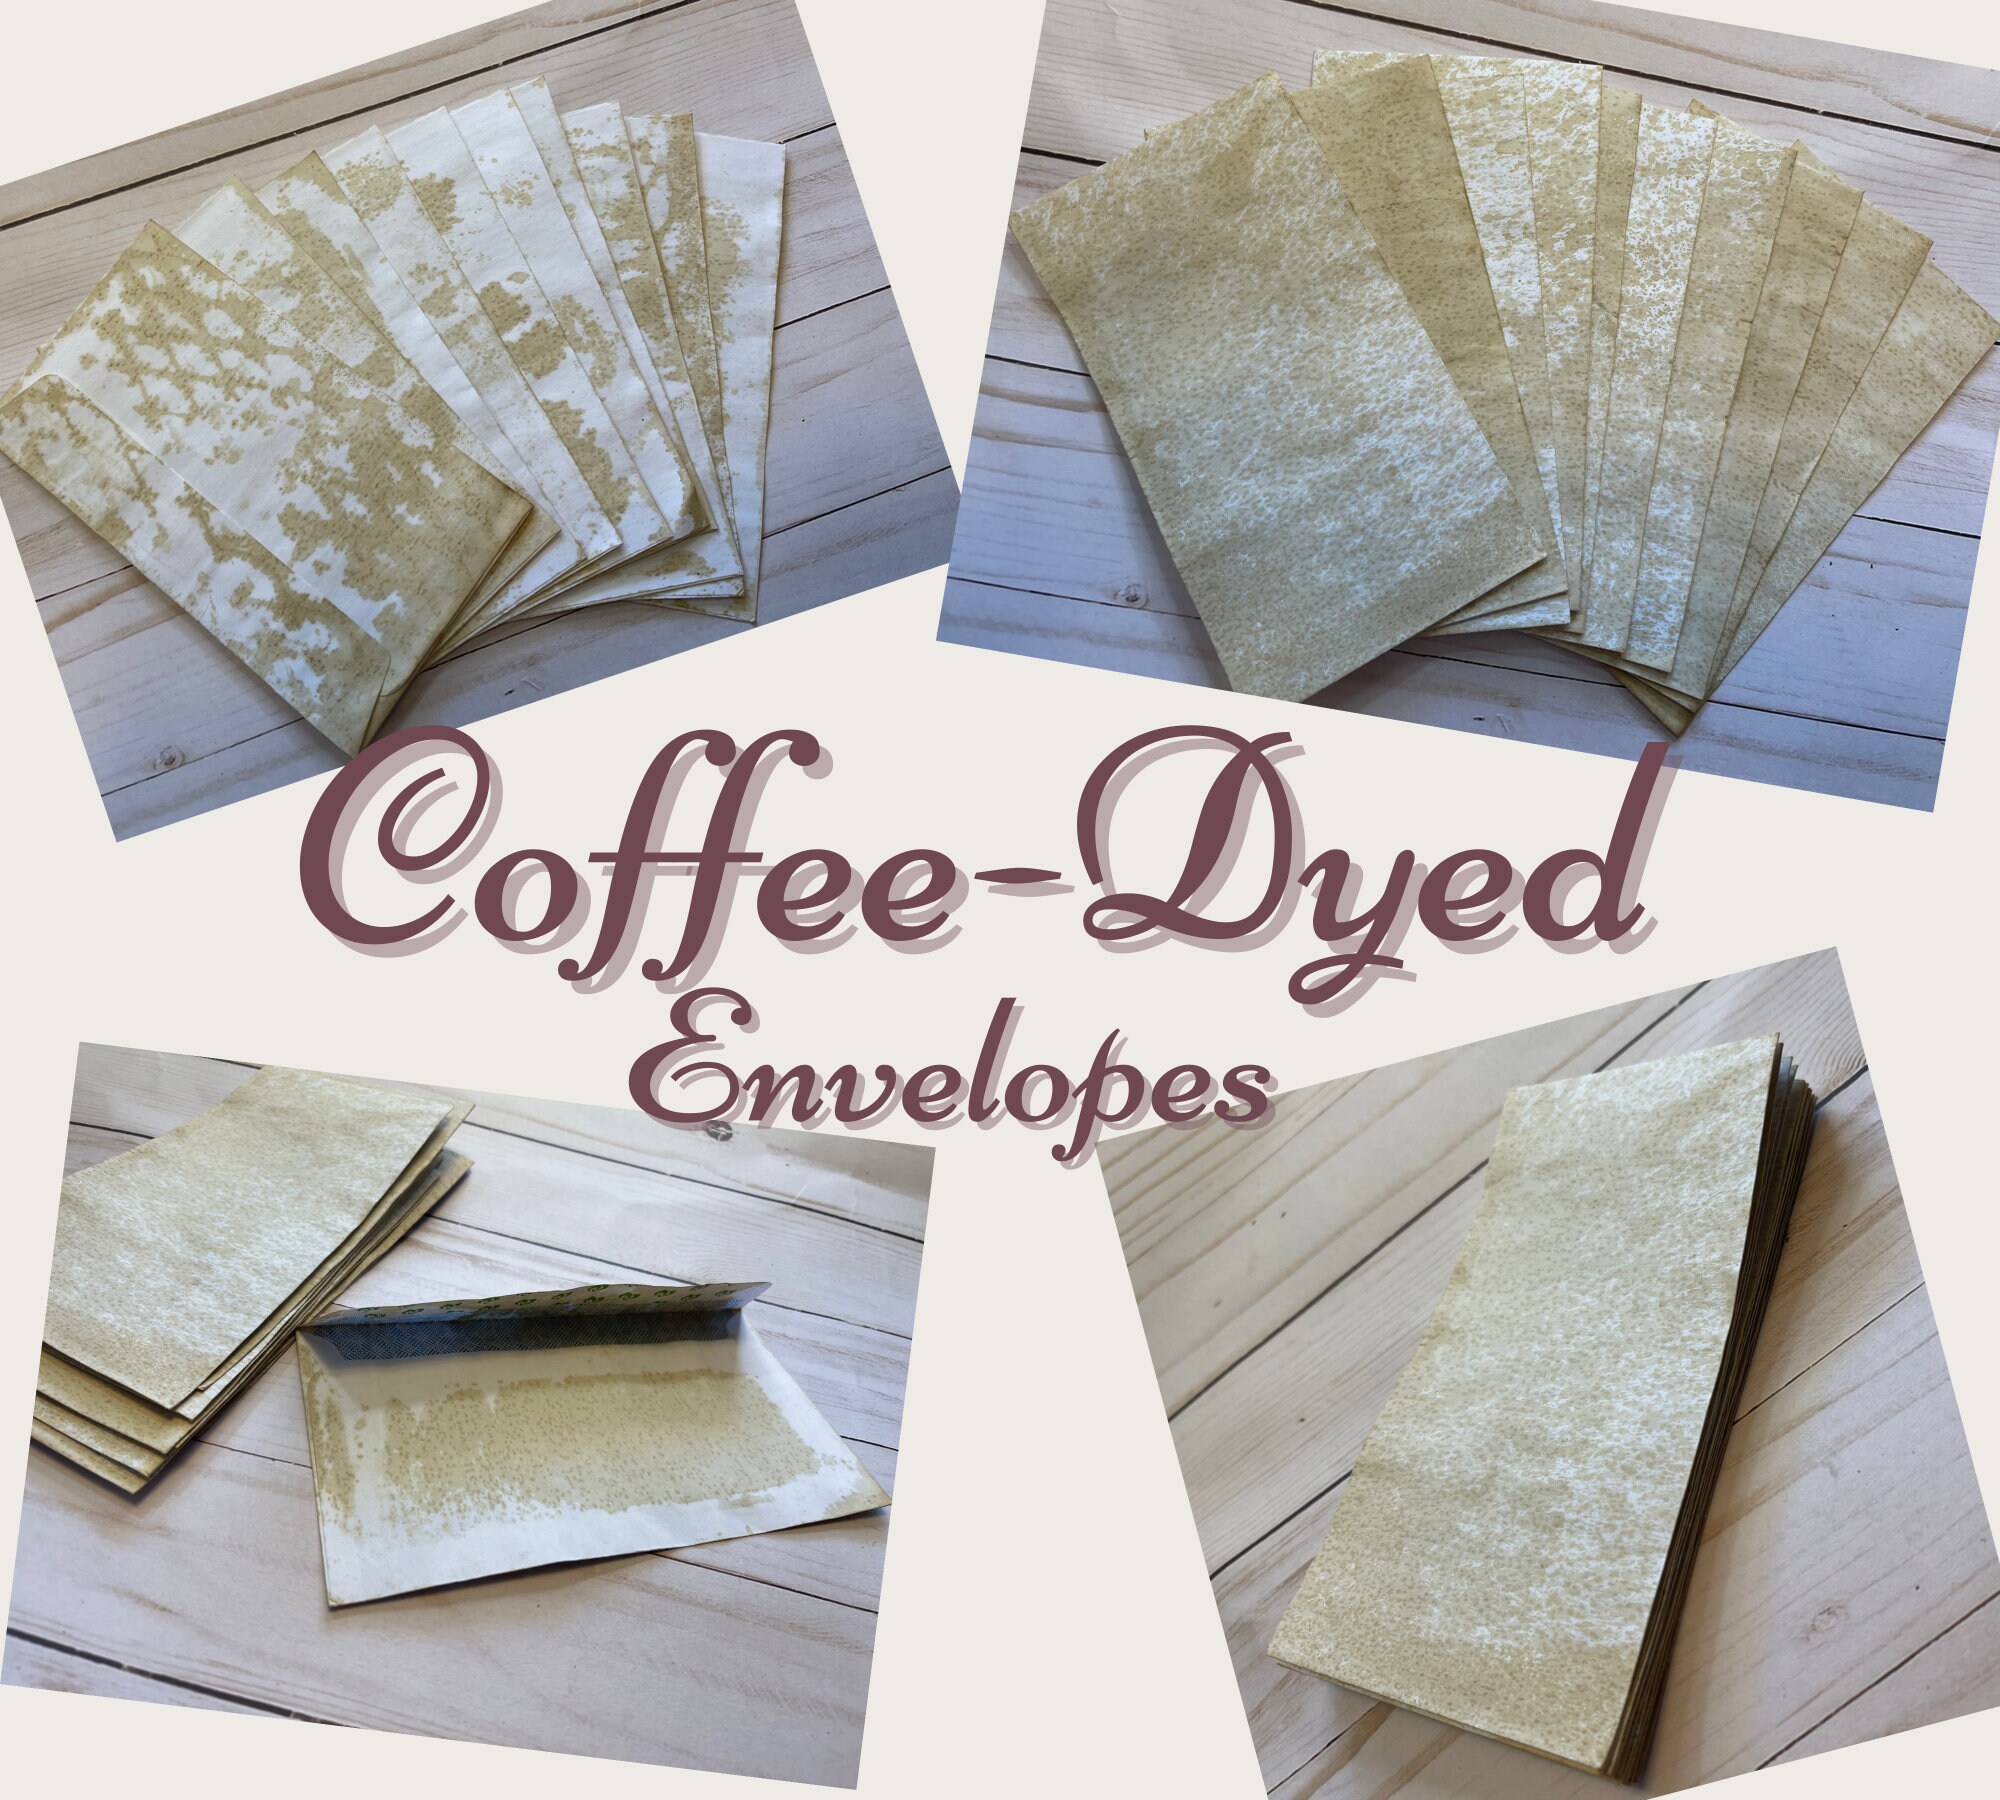 How to make a vintage style envelope